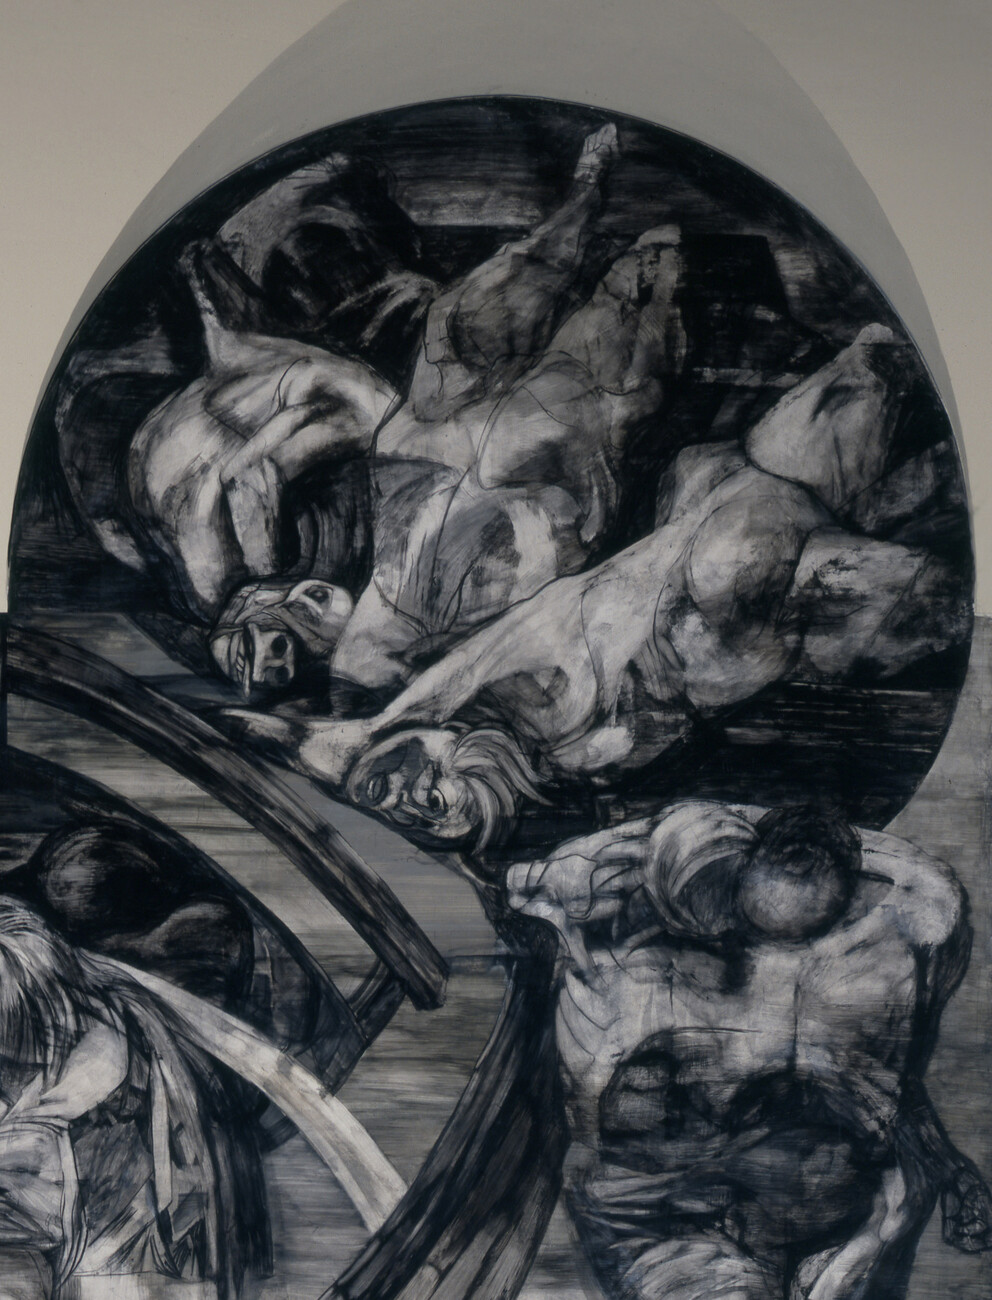 Monochromatic segment of the Genesis mural showing various figures in agony